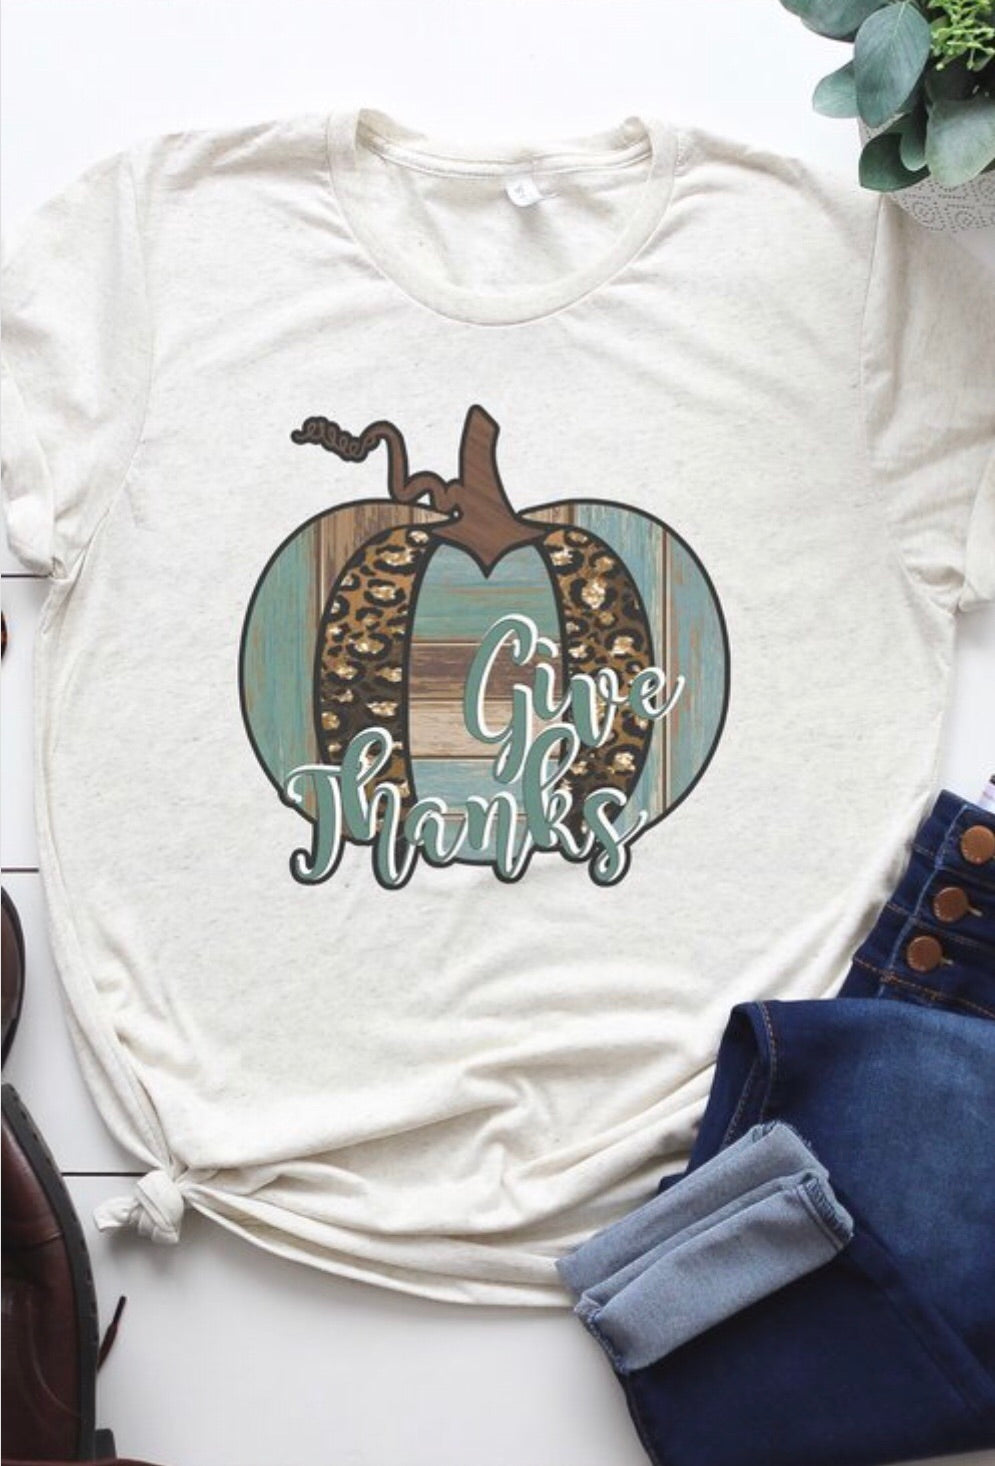 Give Thanks Graphic Tee - Corinne an Affordable Women's Clothing Boutique in the US USA